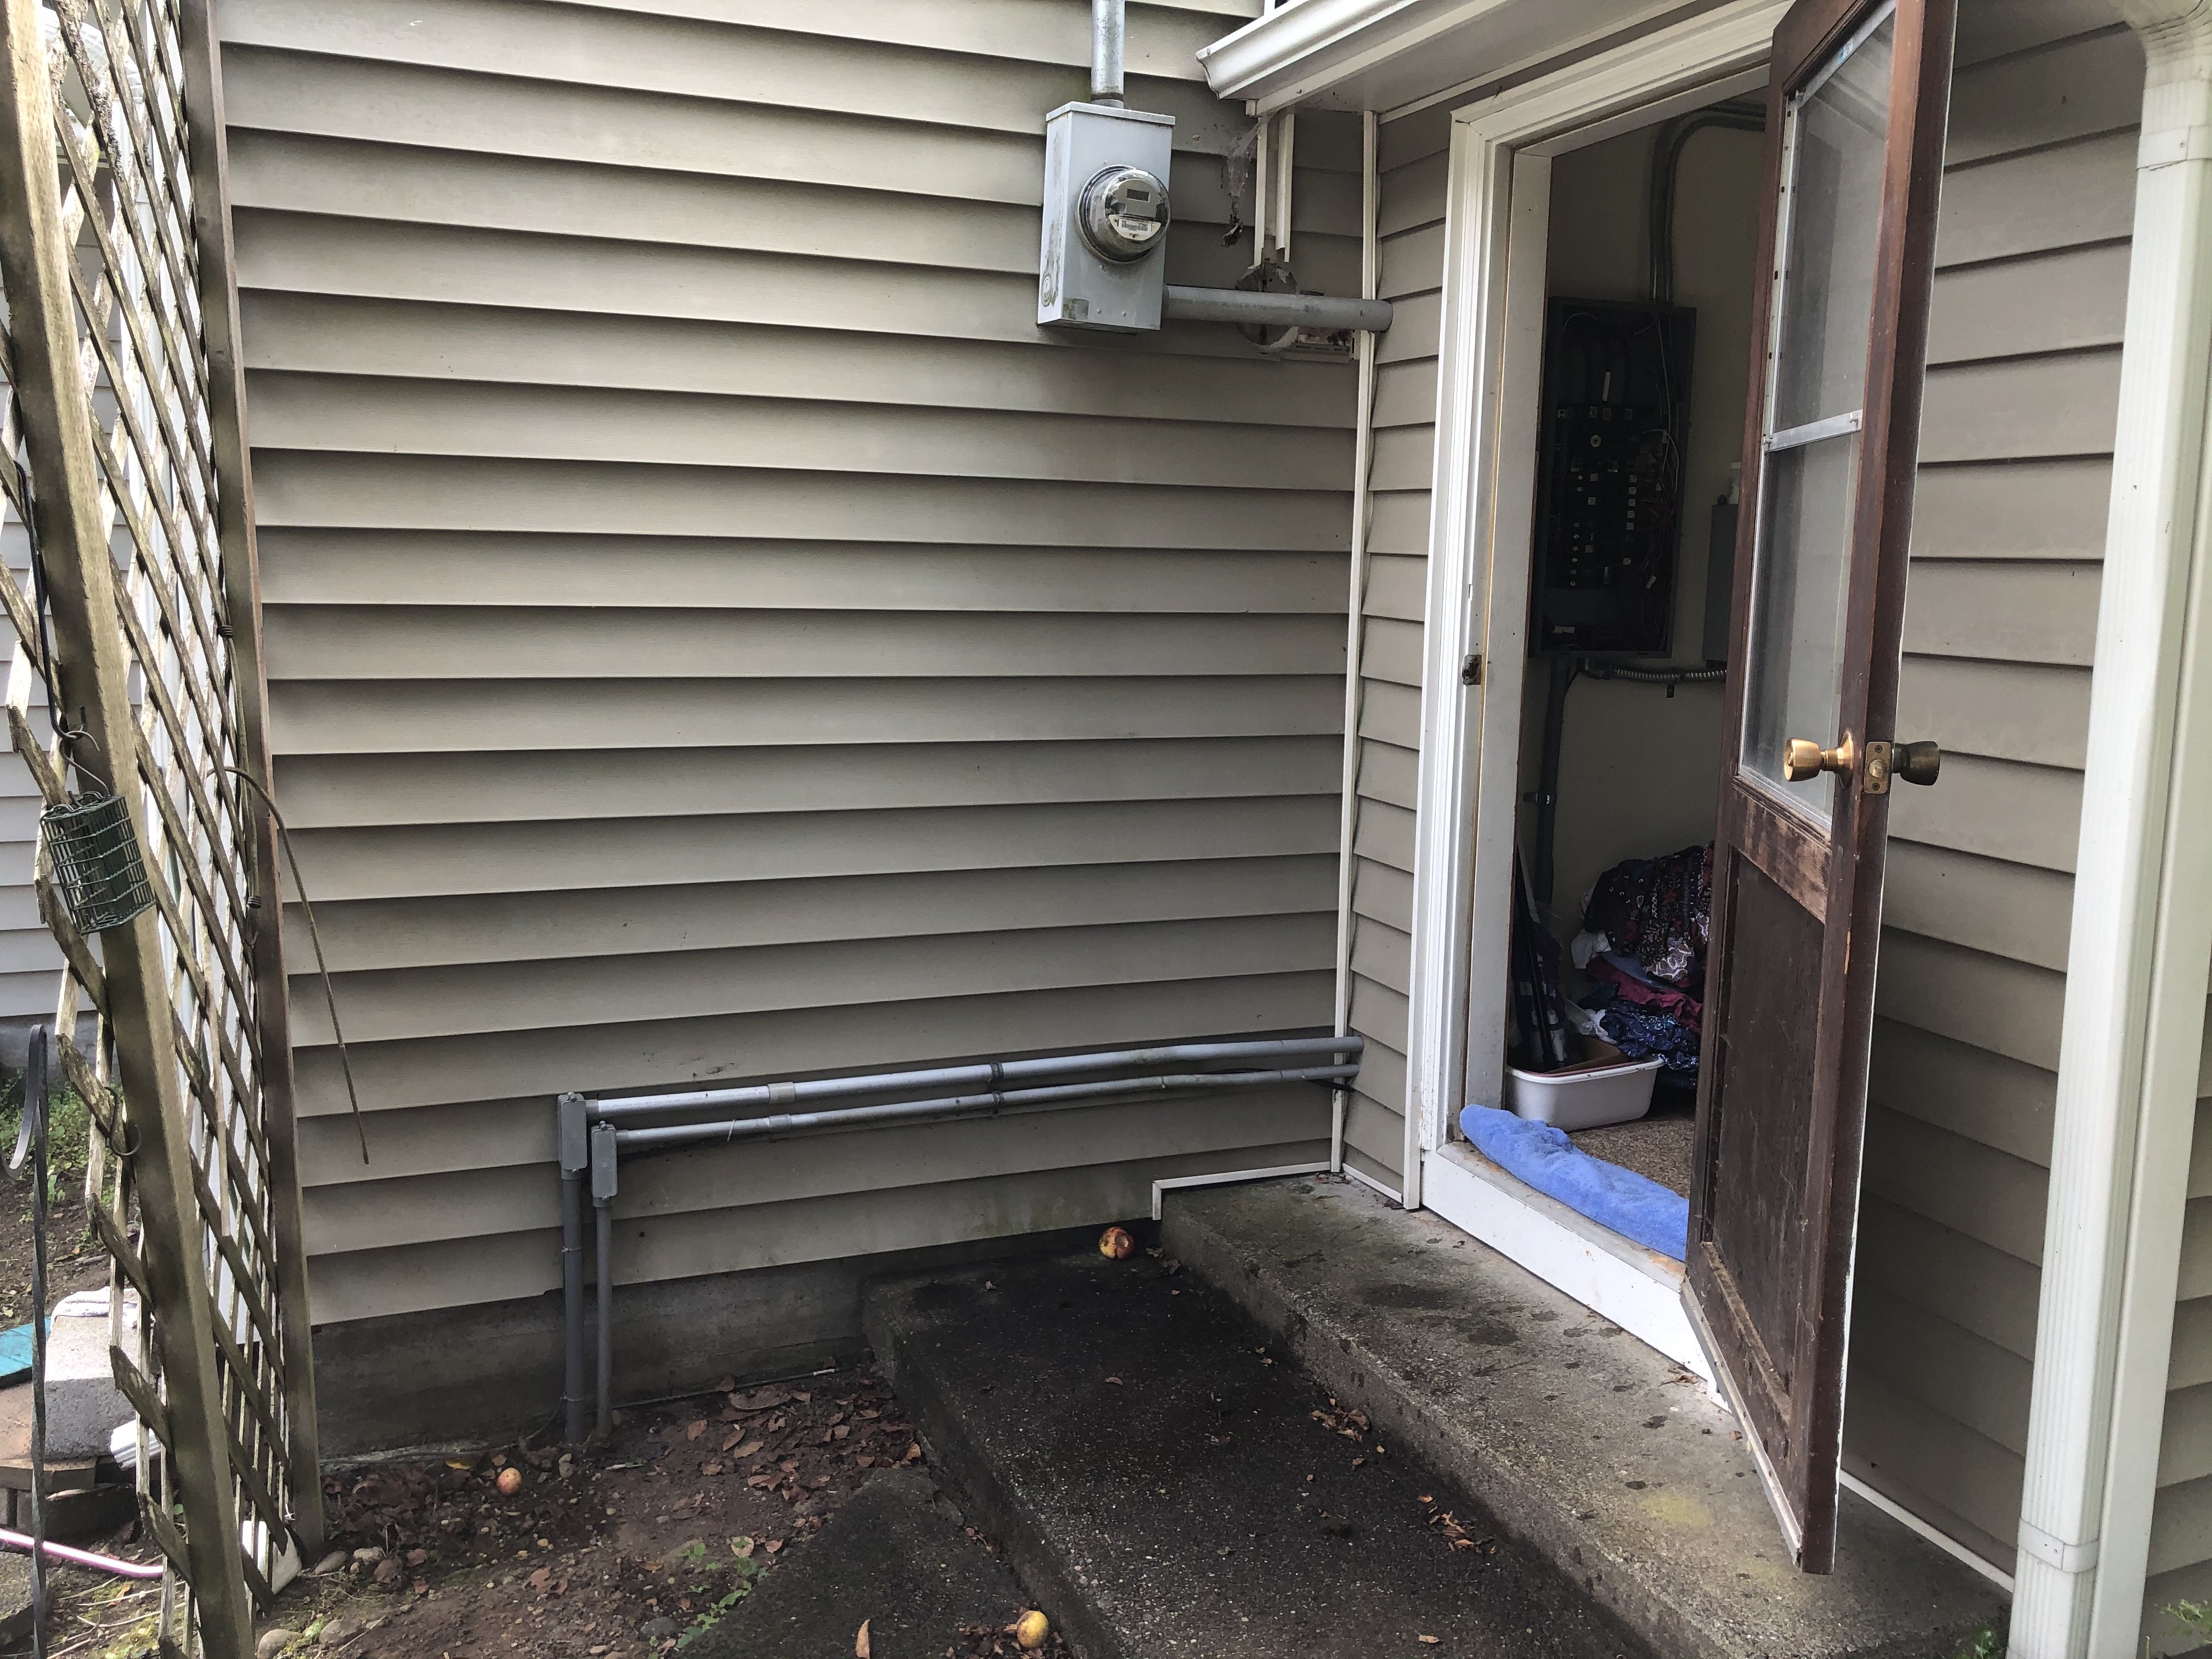 House breaker panel conduit to outside and into ground